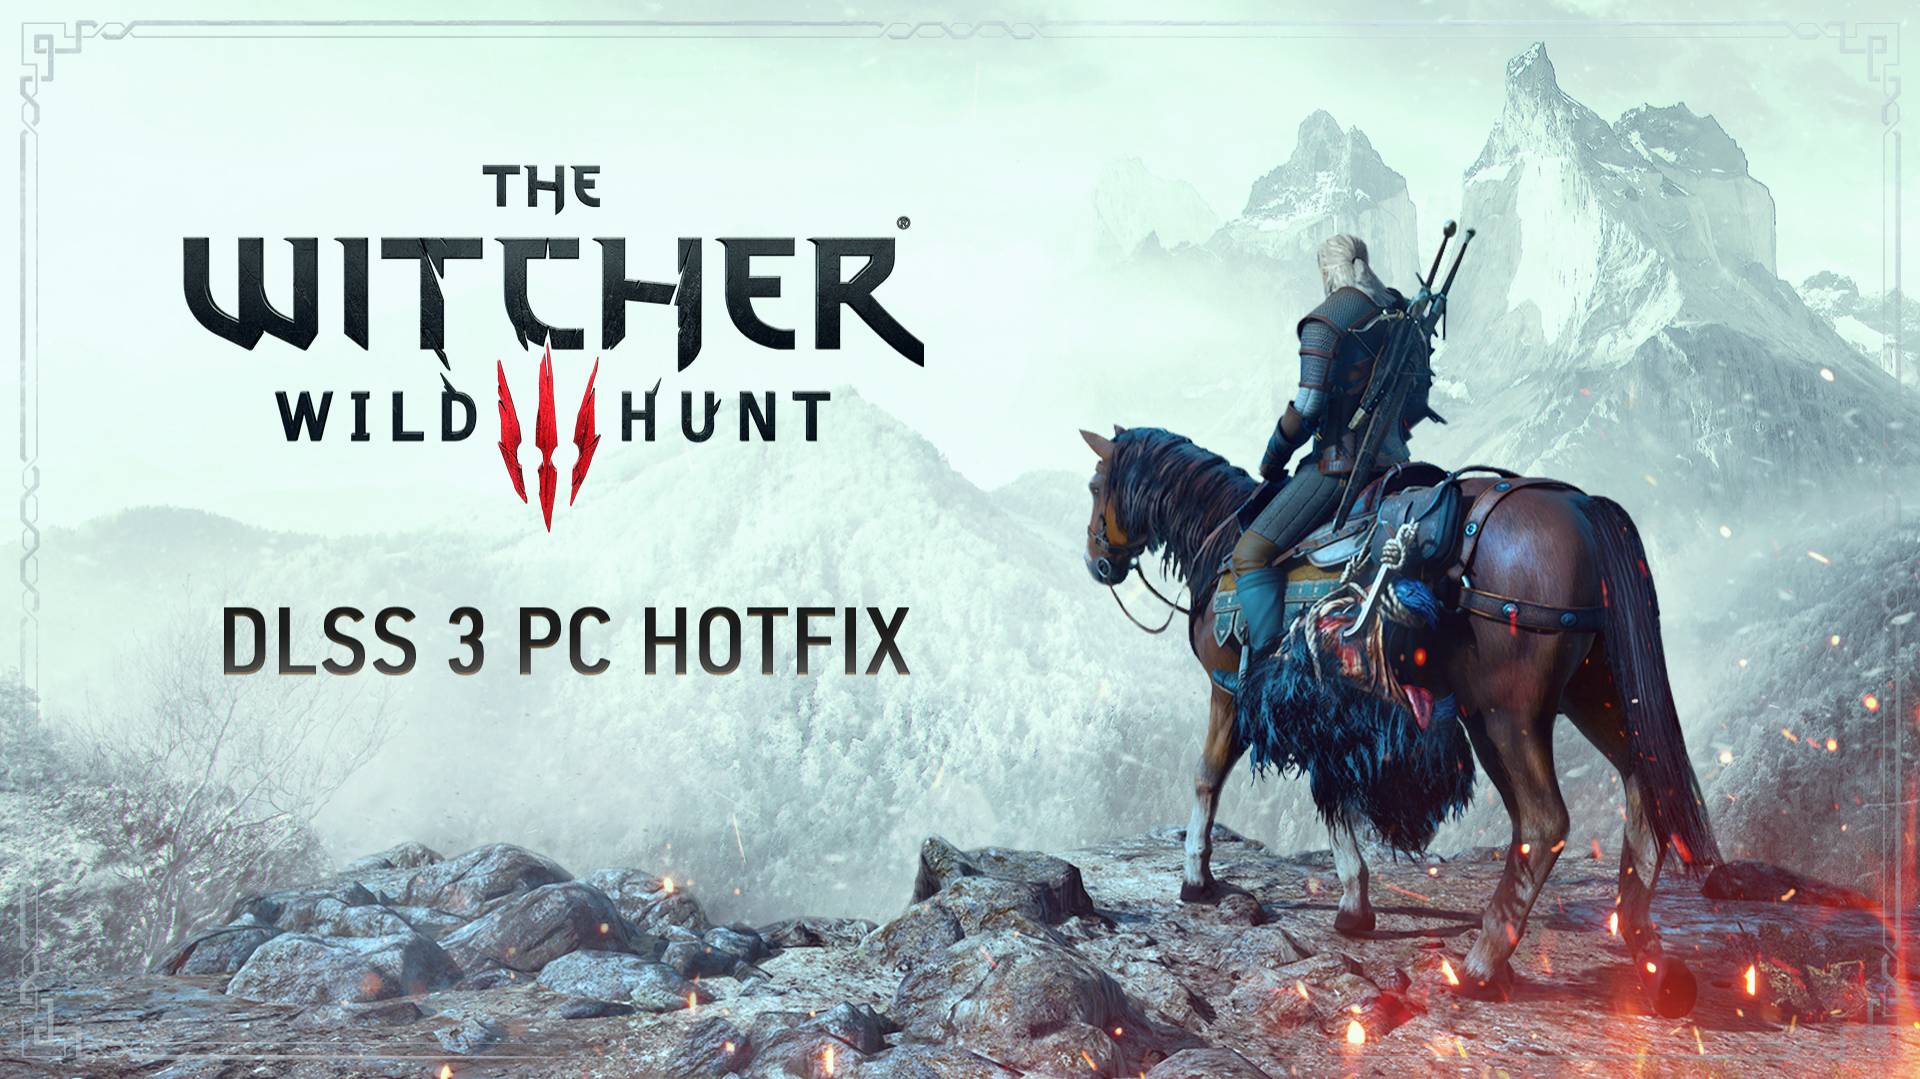 The Witcher - enhanced édition : Witcher, the - Enhanced Edition